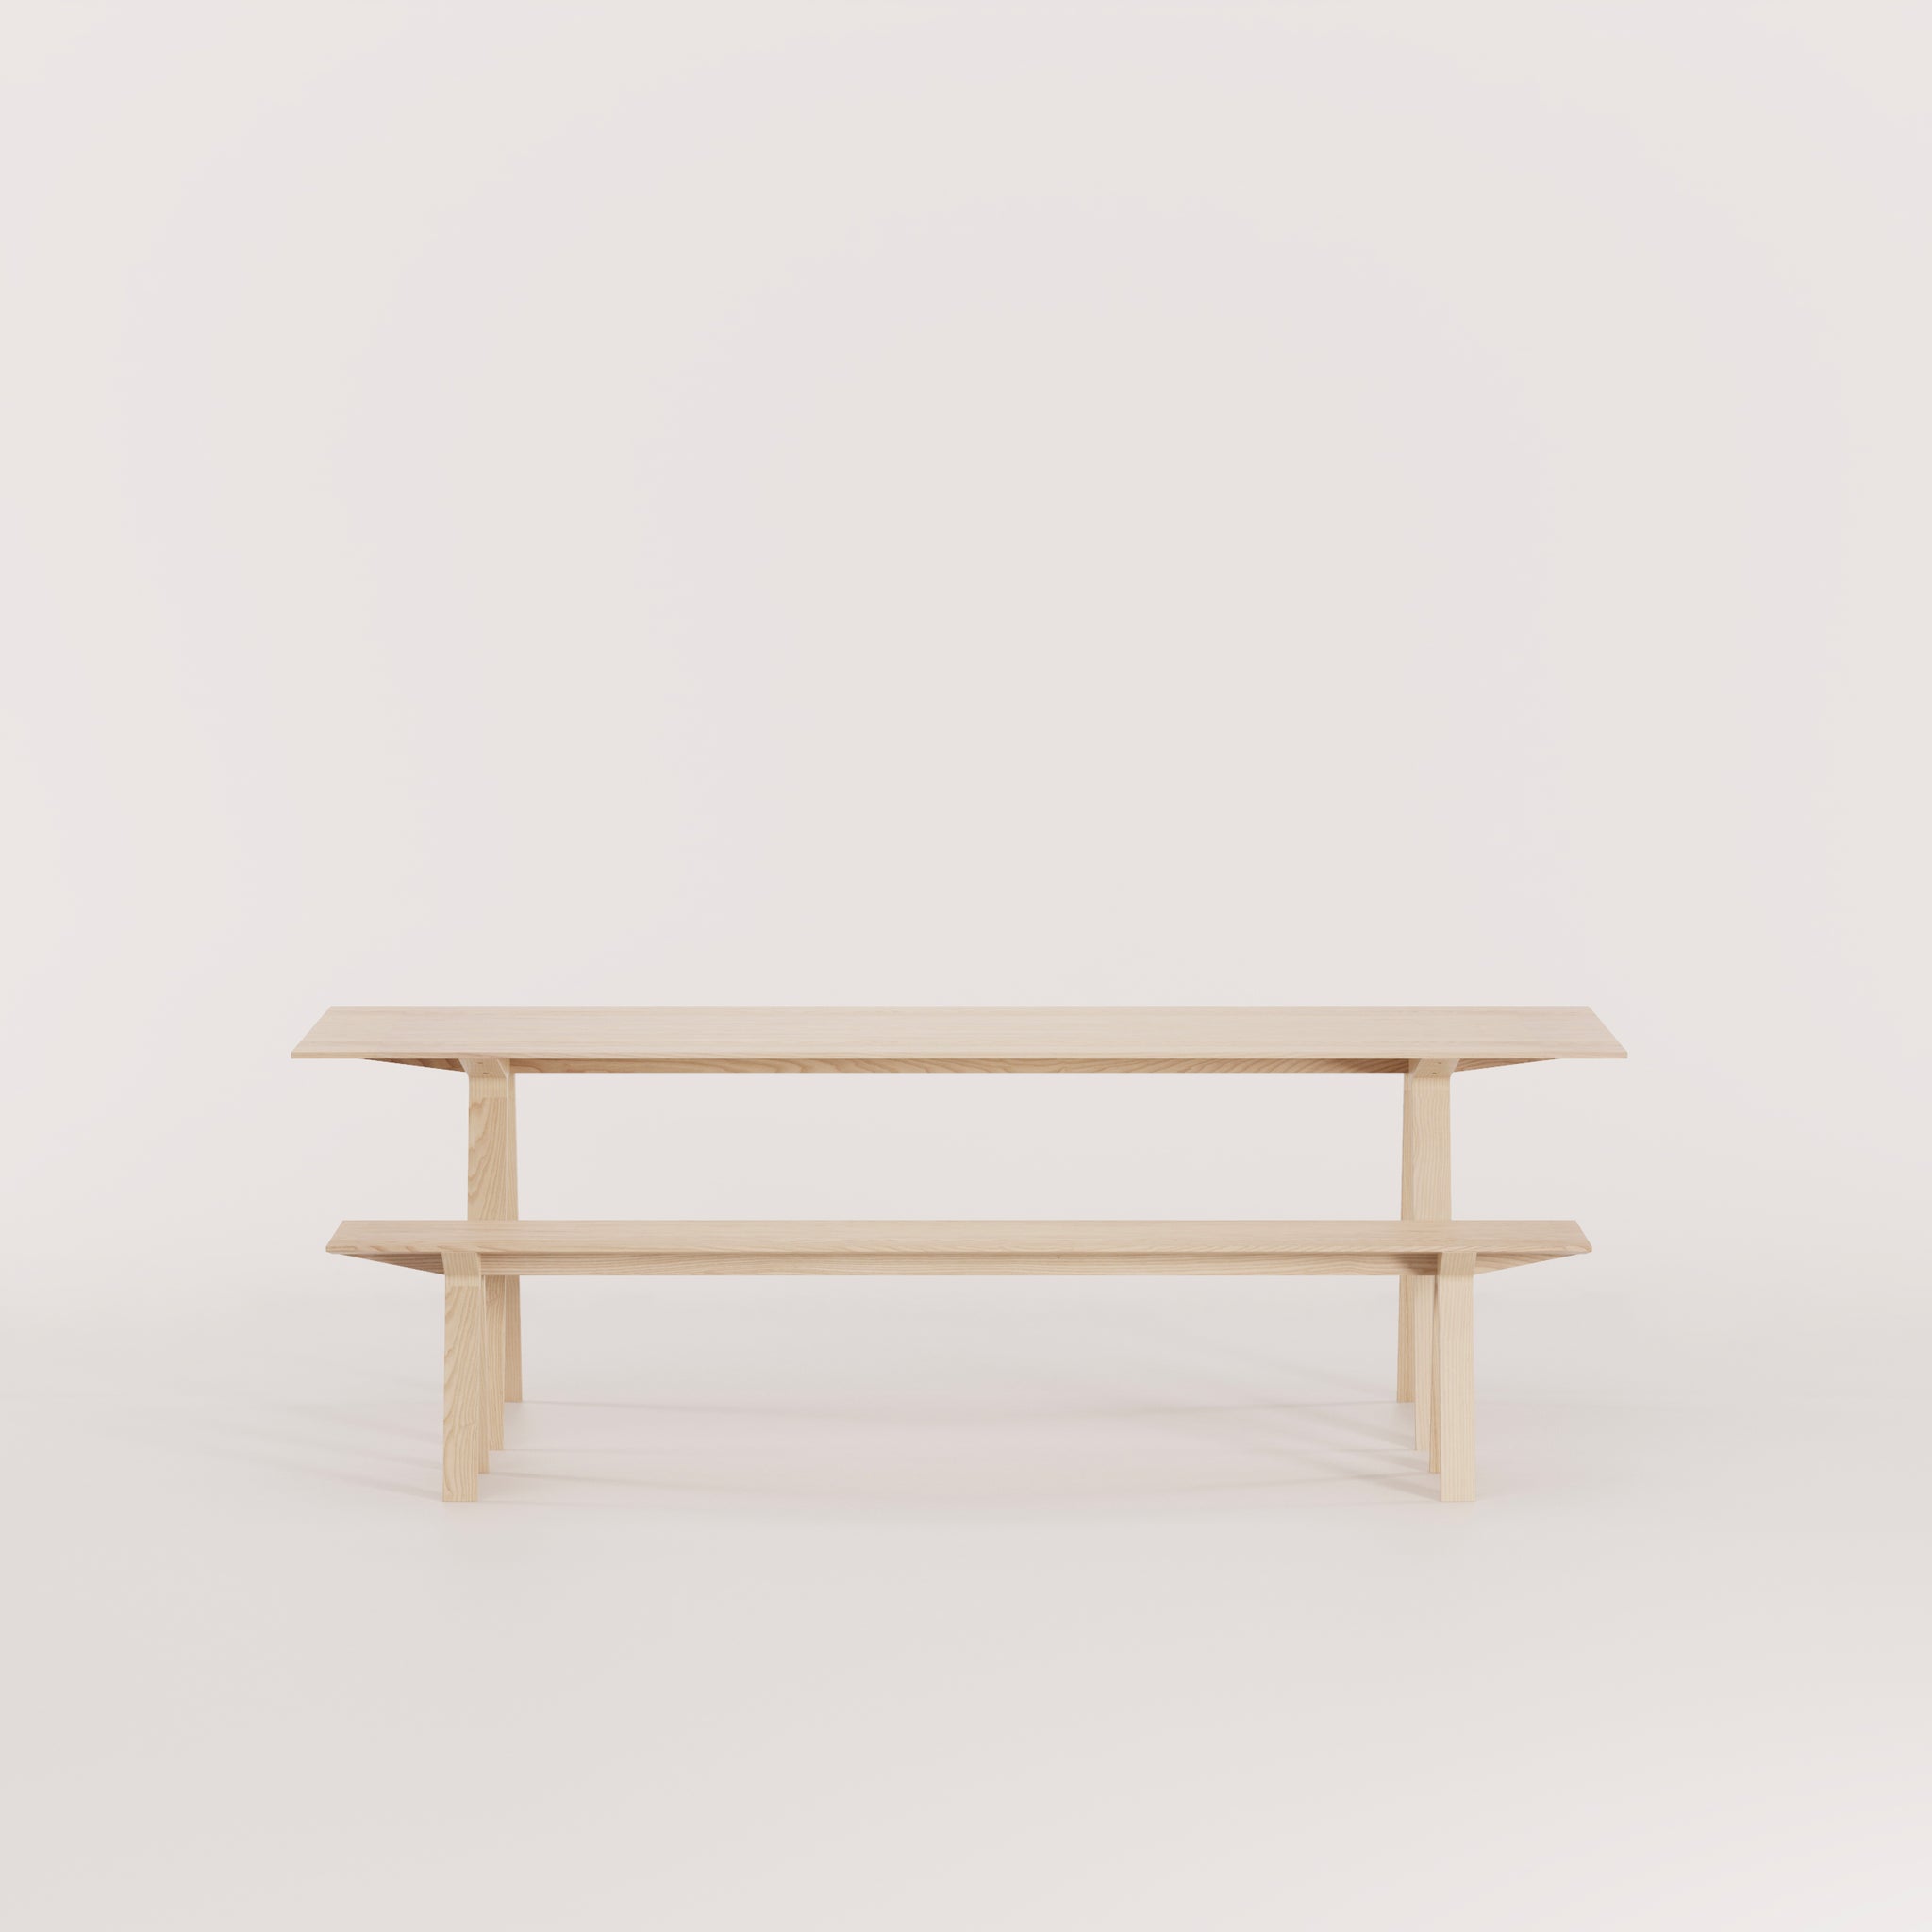 Louis table in White Ash. Designed by Tom Fereday in Australia and handmade by Mast Furniture.